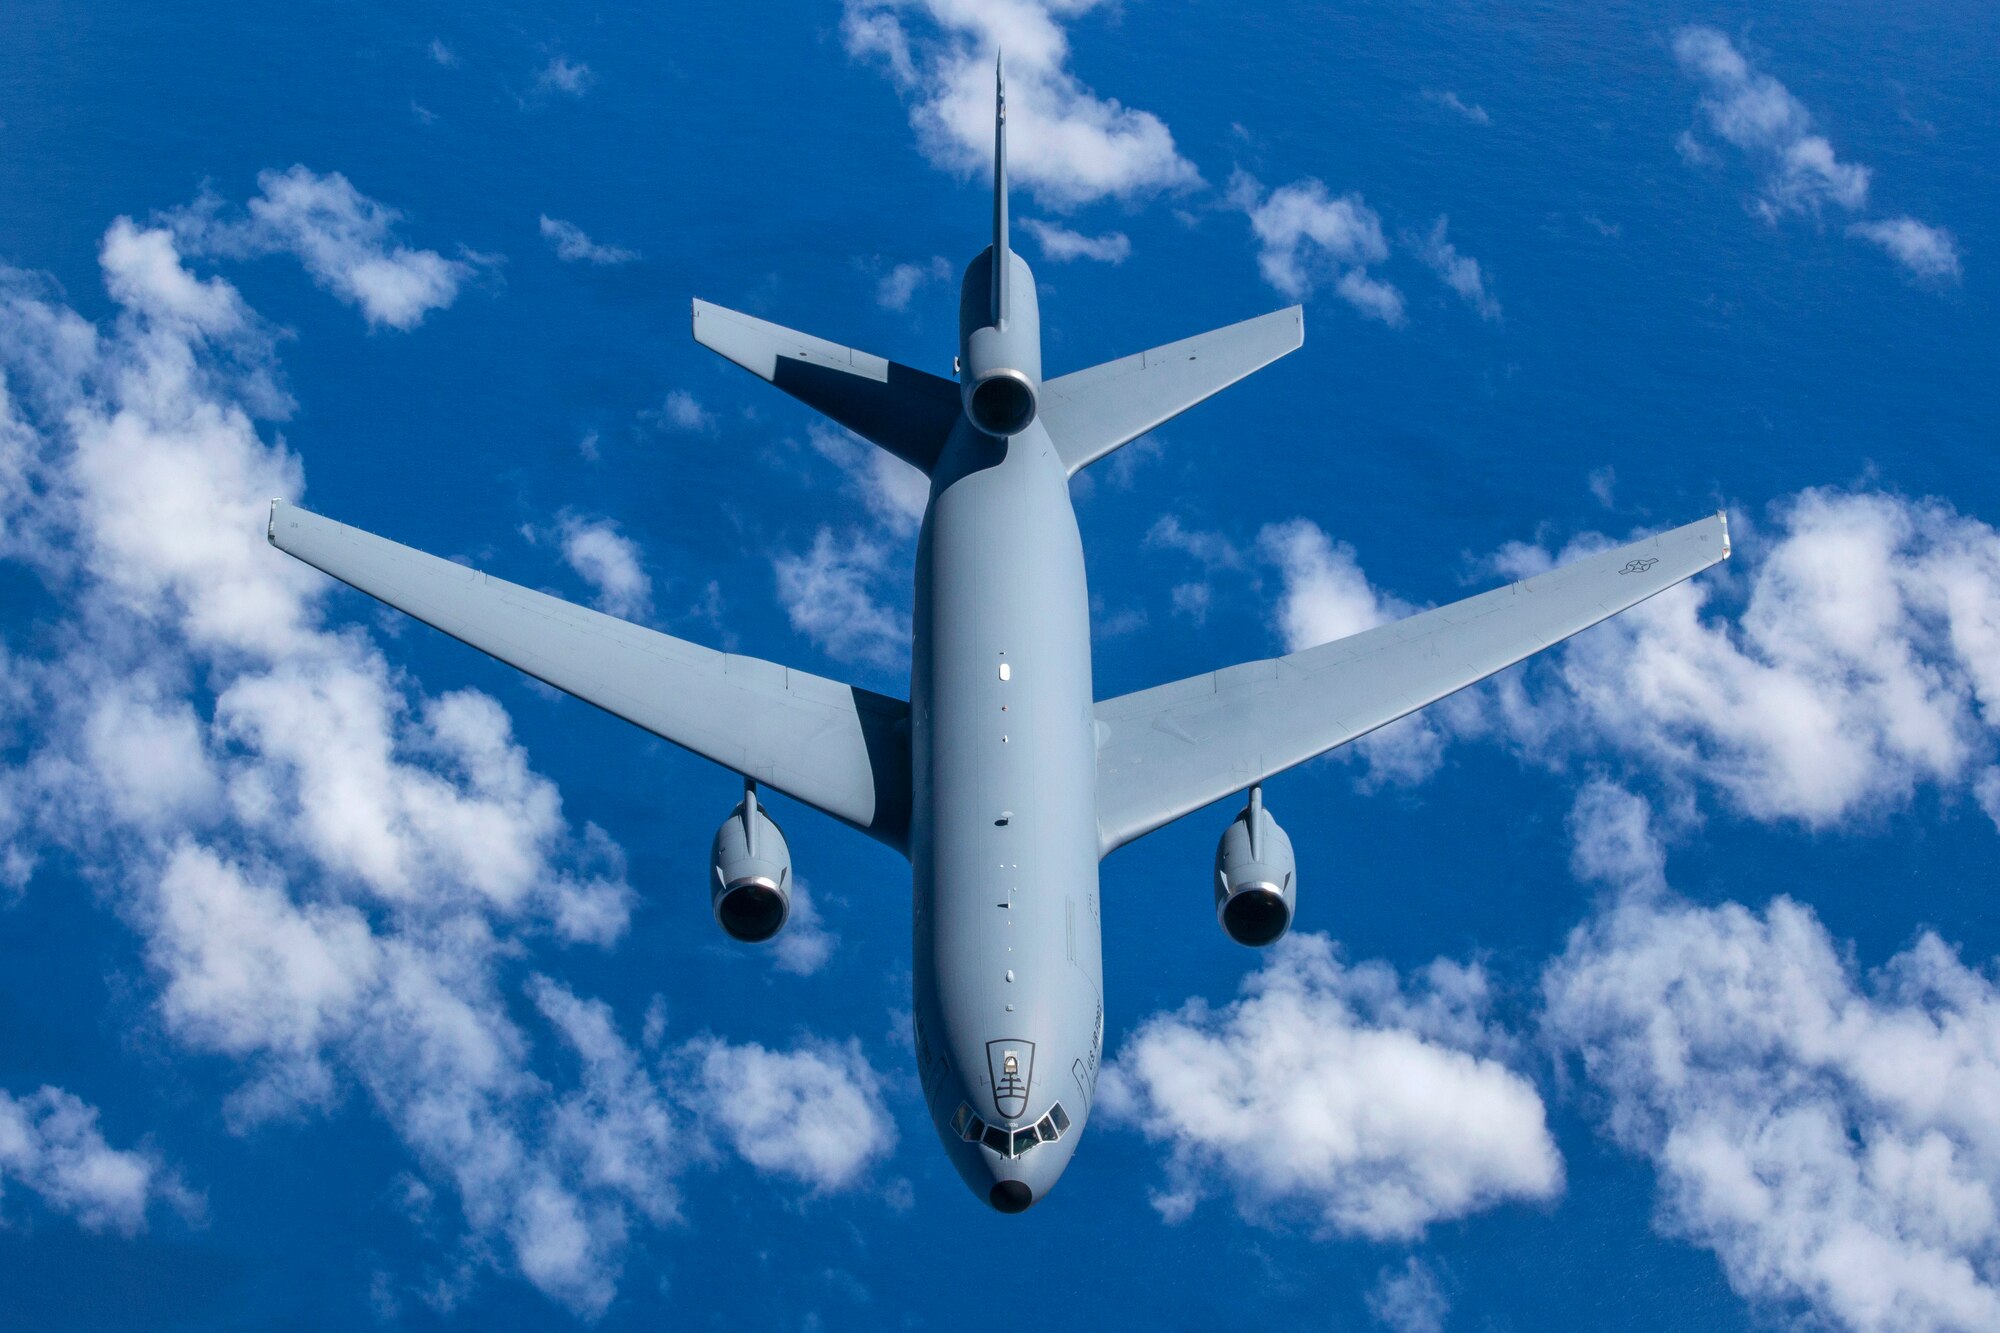 A U.S Air Force KC-10 Extender crewed by Reserve Citizen Airmen with the 76th Air Refueling Squadron, departs after being refueled by a KC-10 crewed by Airmen with the 78th Air Refueling Squadron, both with the 514th Air Mobility Wing, during a training mission over the East Coast Sept. 16, 2018. The 514th is an Air Force Reserve Command Unit located at Joint Base McGuire-Dix-Lakehurst, N.J. (U.S. Air Force photo by Master Sgt. Mark C. Olsen)